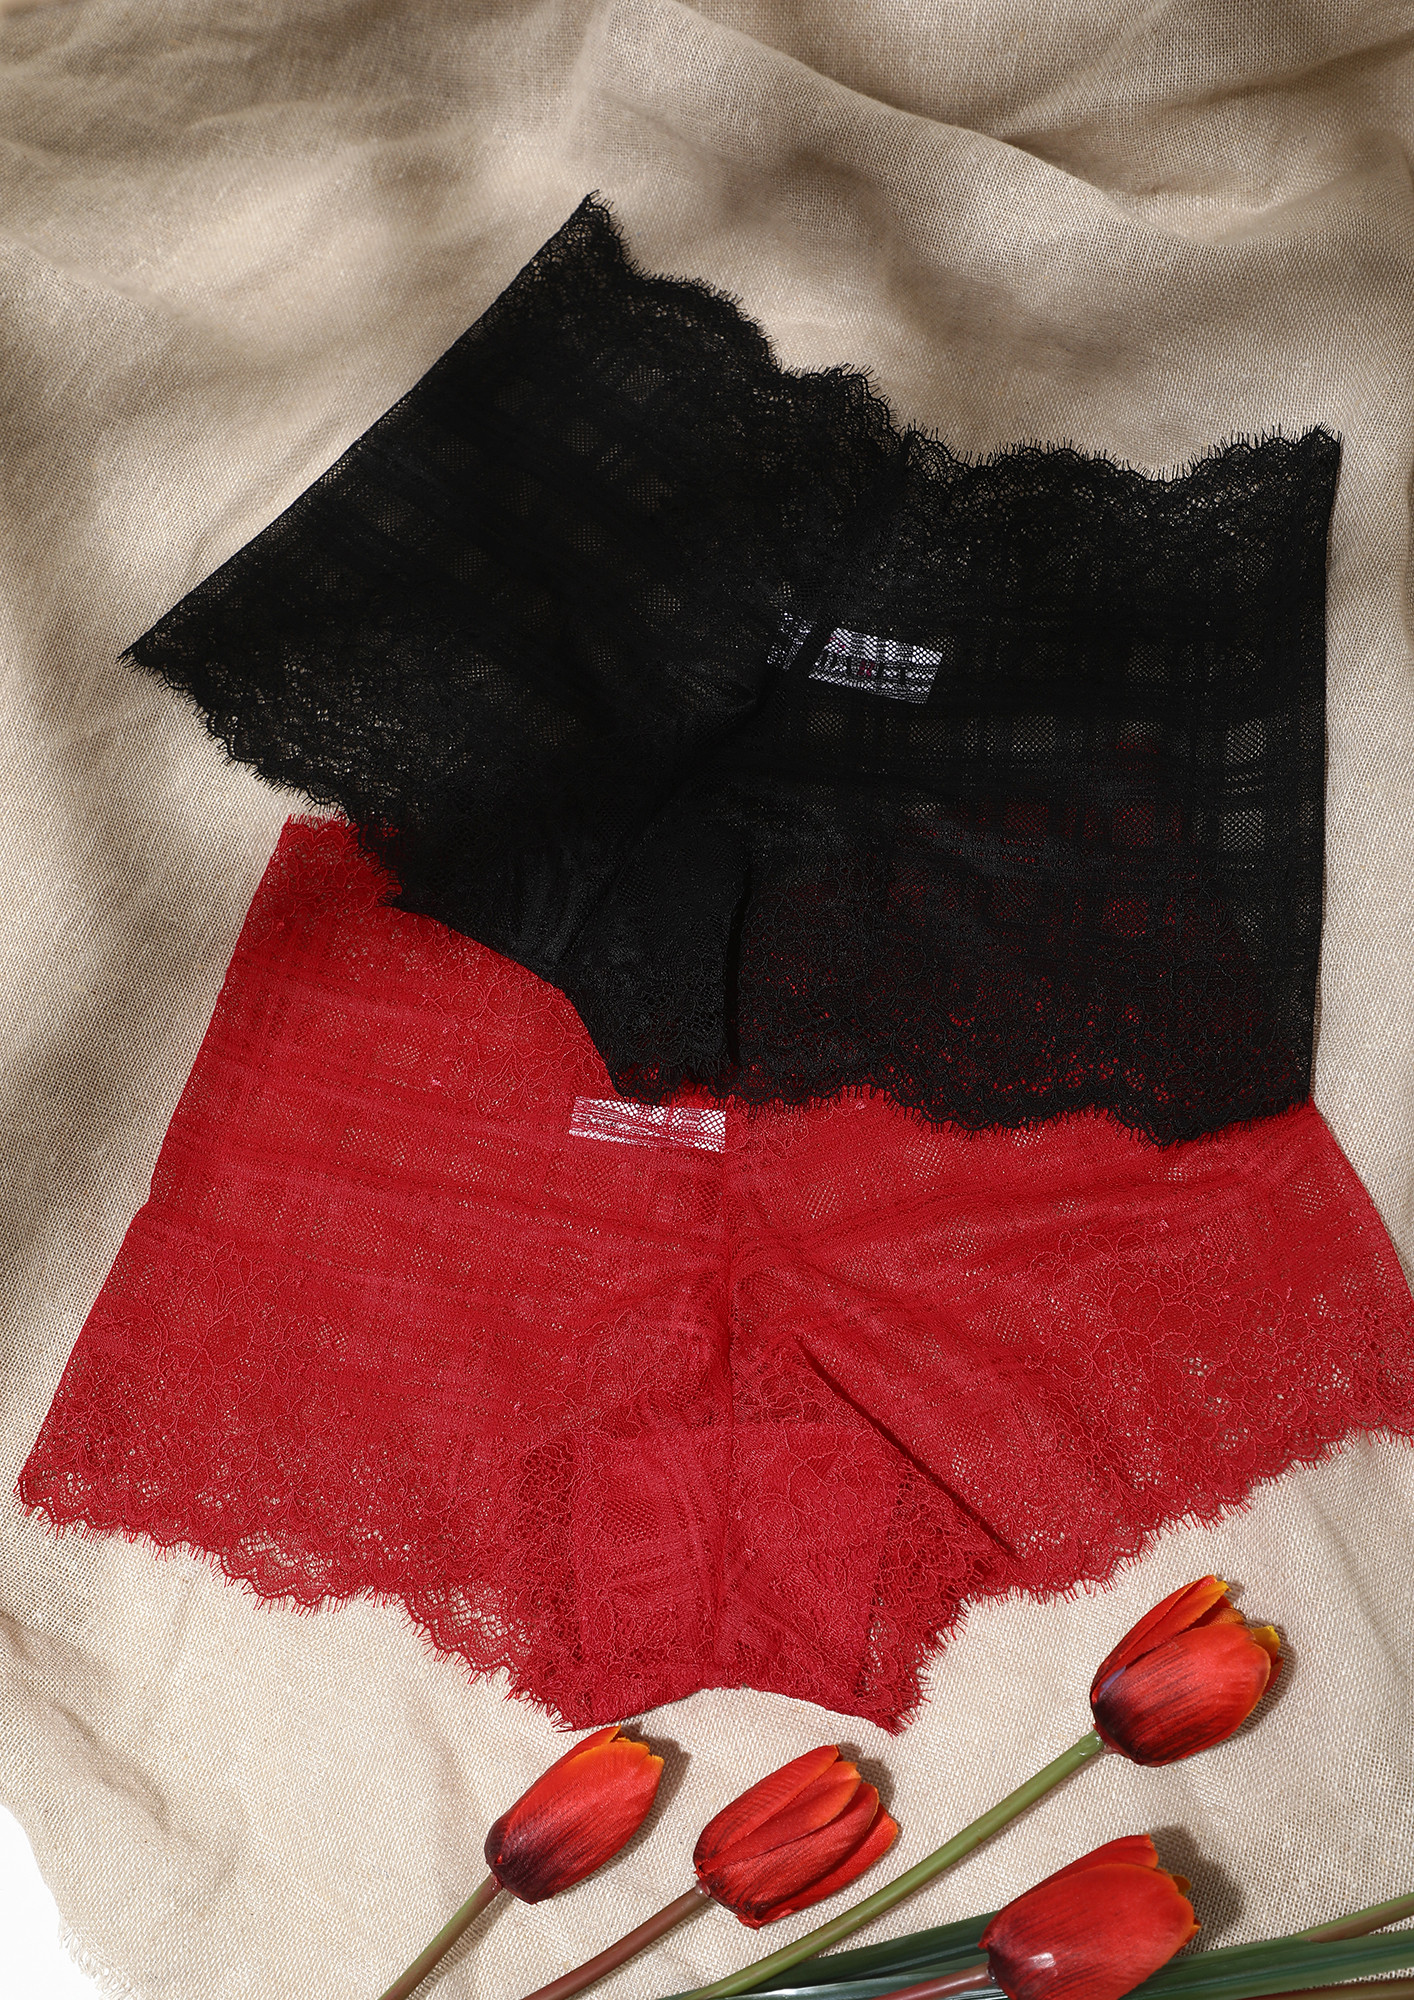 LOVE HANDLES BLACK AND RED BOY SHORTS COMBO